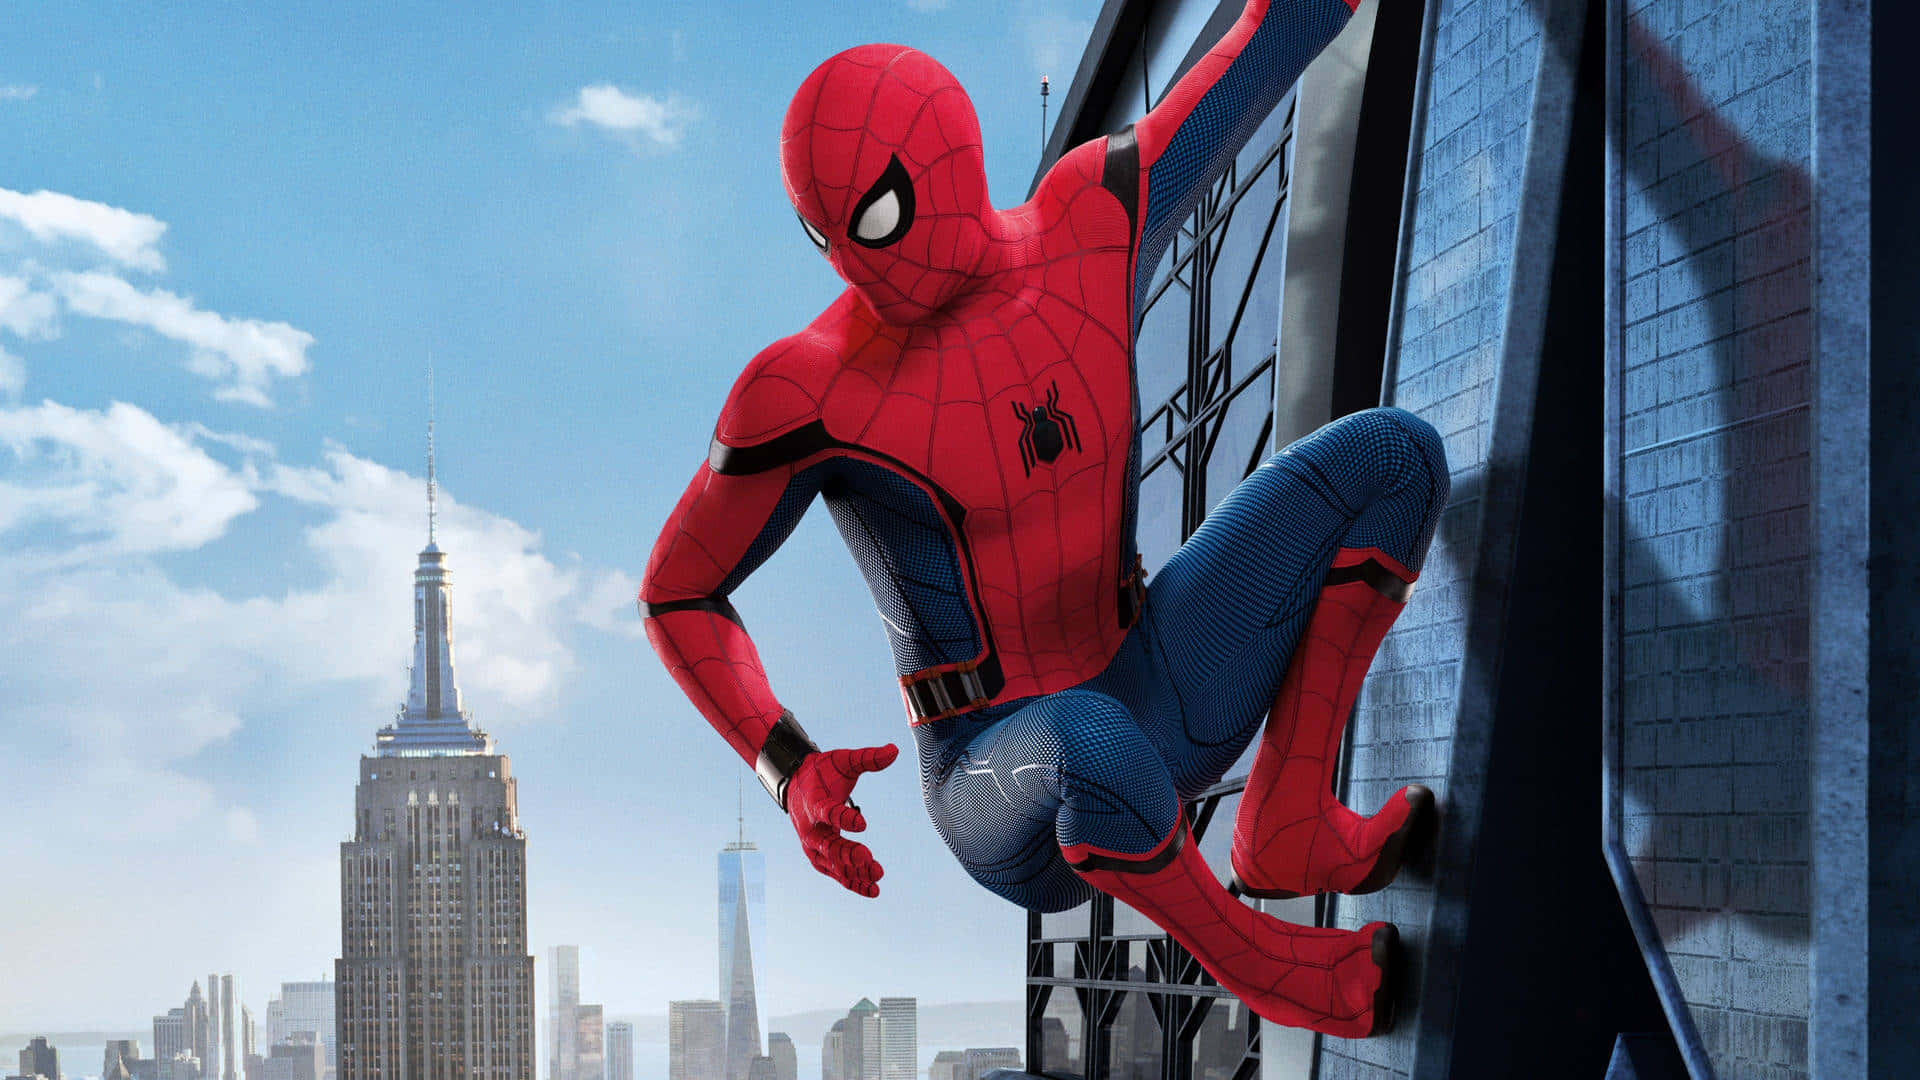 Spider Man Cool Sticking To High-rise Building Background